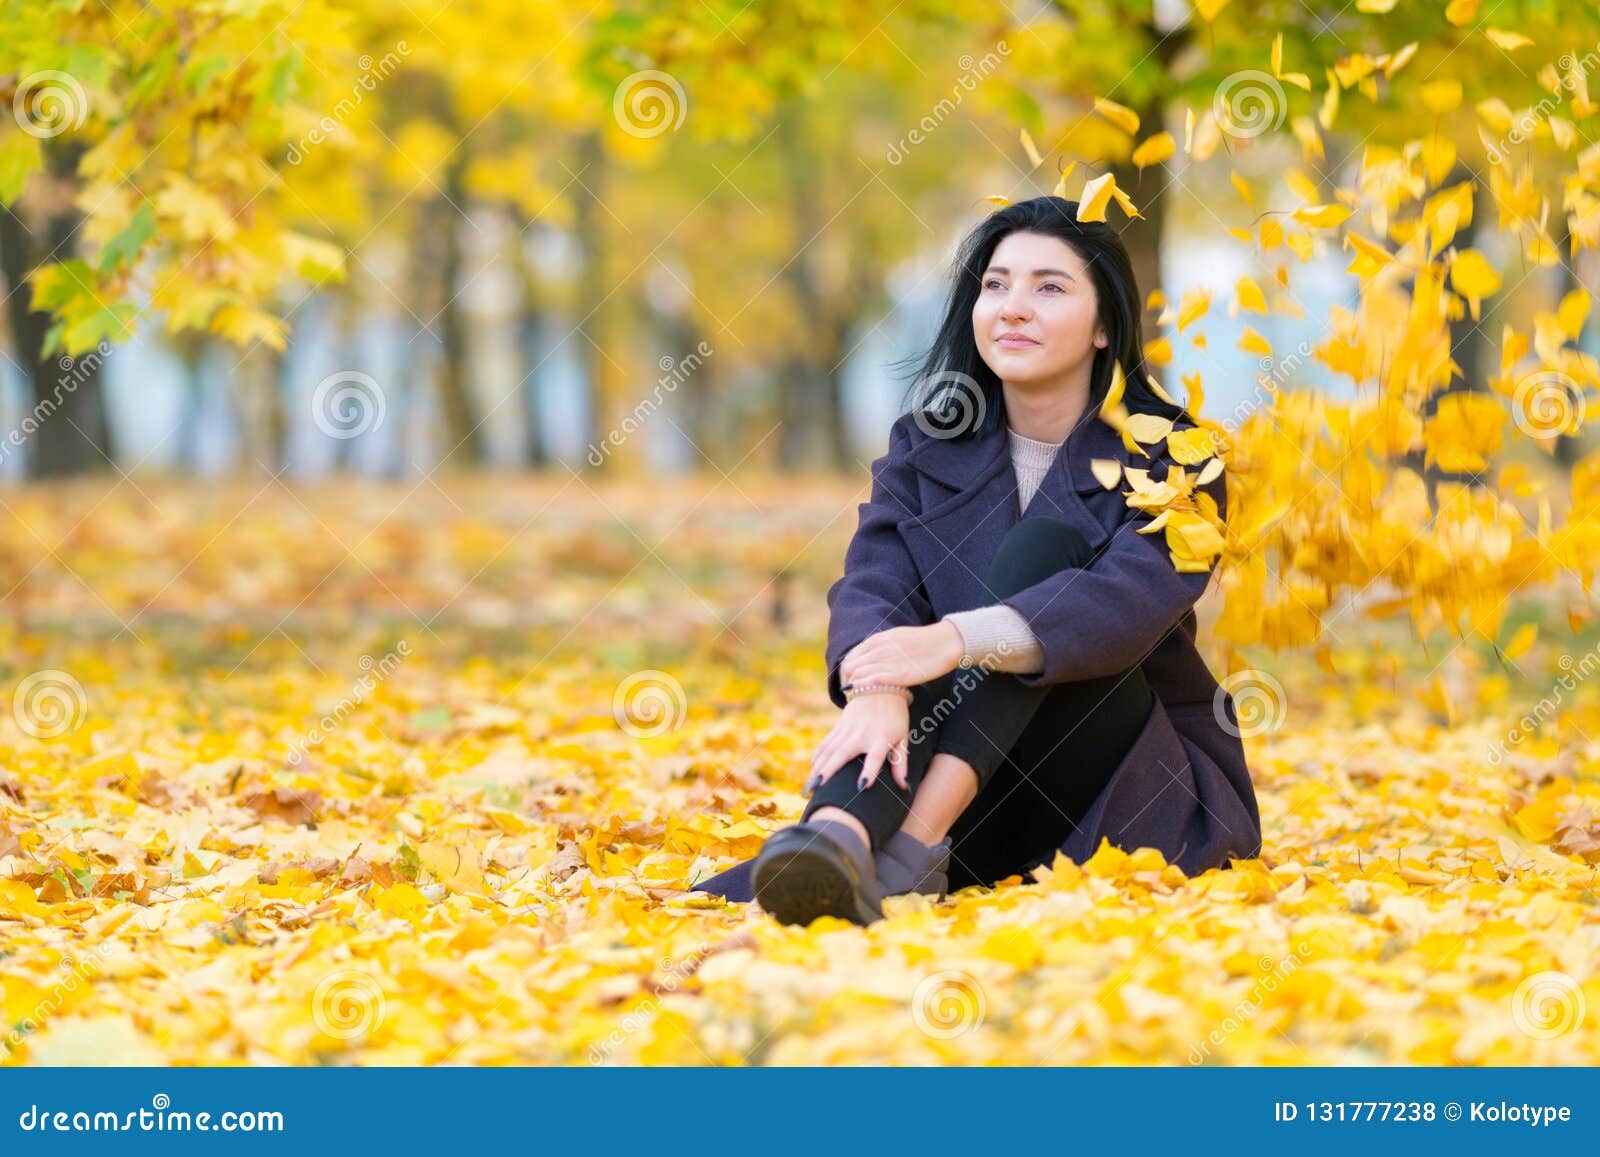 Young Woman Sitting in an Autumn Park. Stock Photo - Image of ground ...